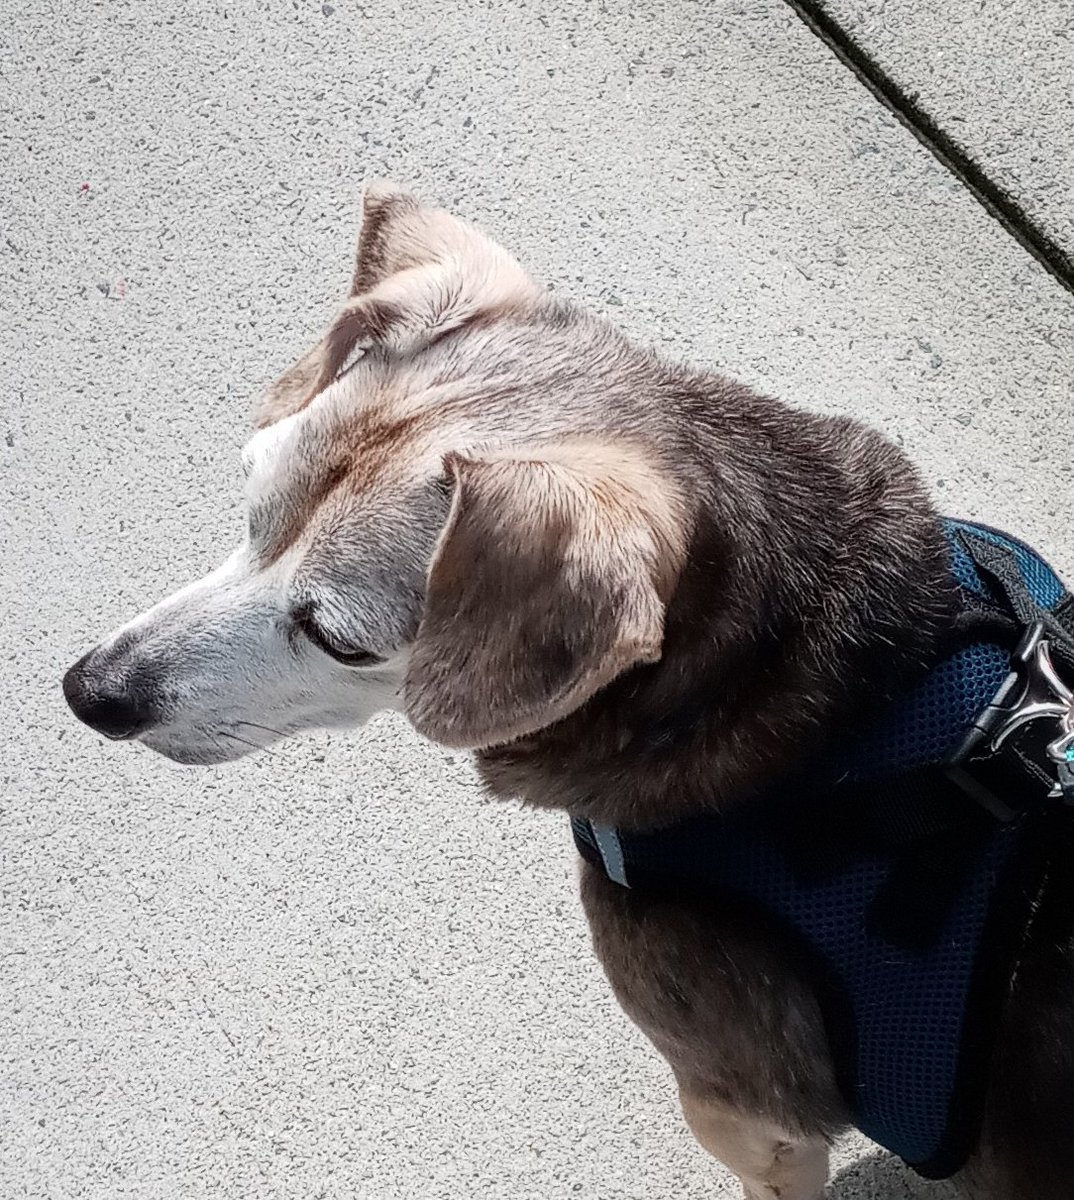 #WednesdayWalk #ZSHQ #dogsoftwitter After4 days of rains, I had a big job of sniff screaming for zombs. I see da spichus truck in da perimeter. I stares at it with my lazer eyes until it left. I spects it trying to bring zomb supplies. RAAAaaa!